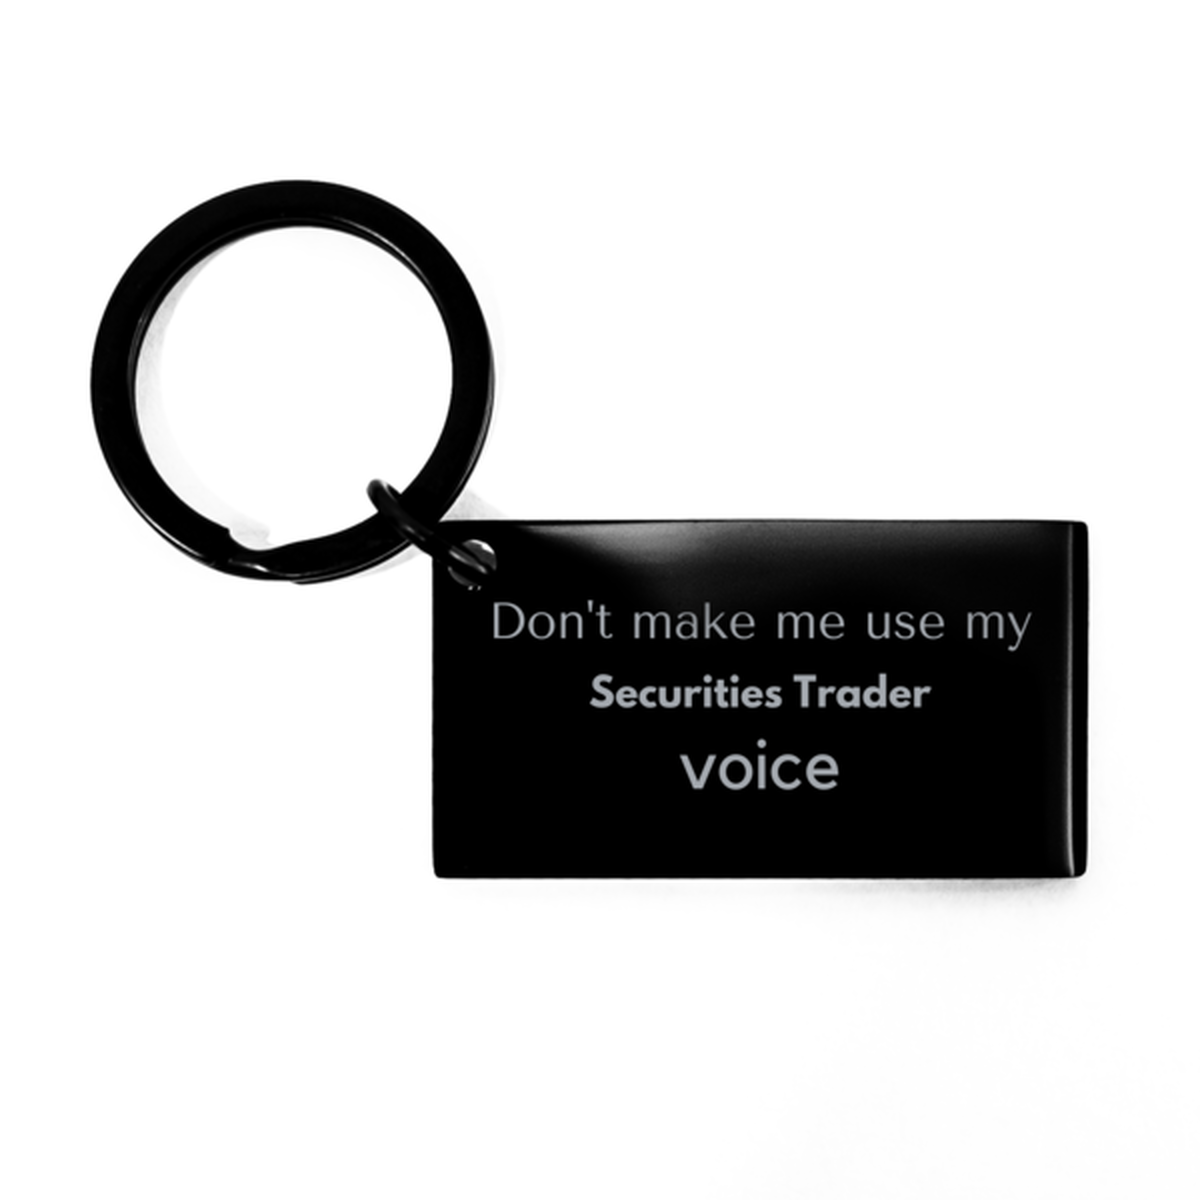 Don't make me use my Securities Trader voice, Sarcasm Securities Trader Gifts, Christmas Securities Trader Keychain Birthday Unique Gifts For Securities Trader Coworkers, Men, Women, Colleague, Friends